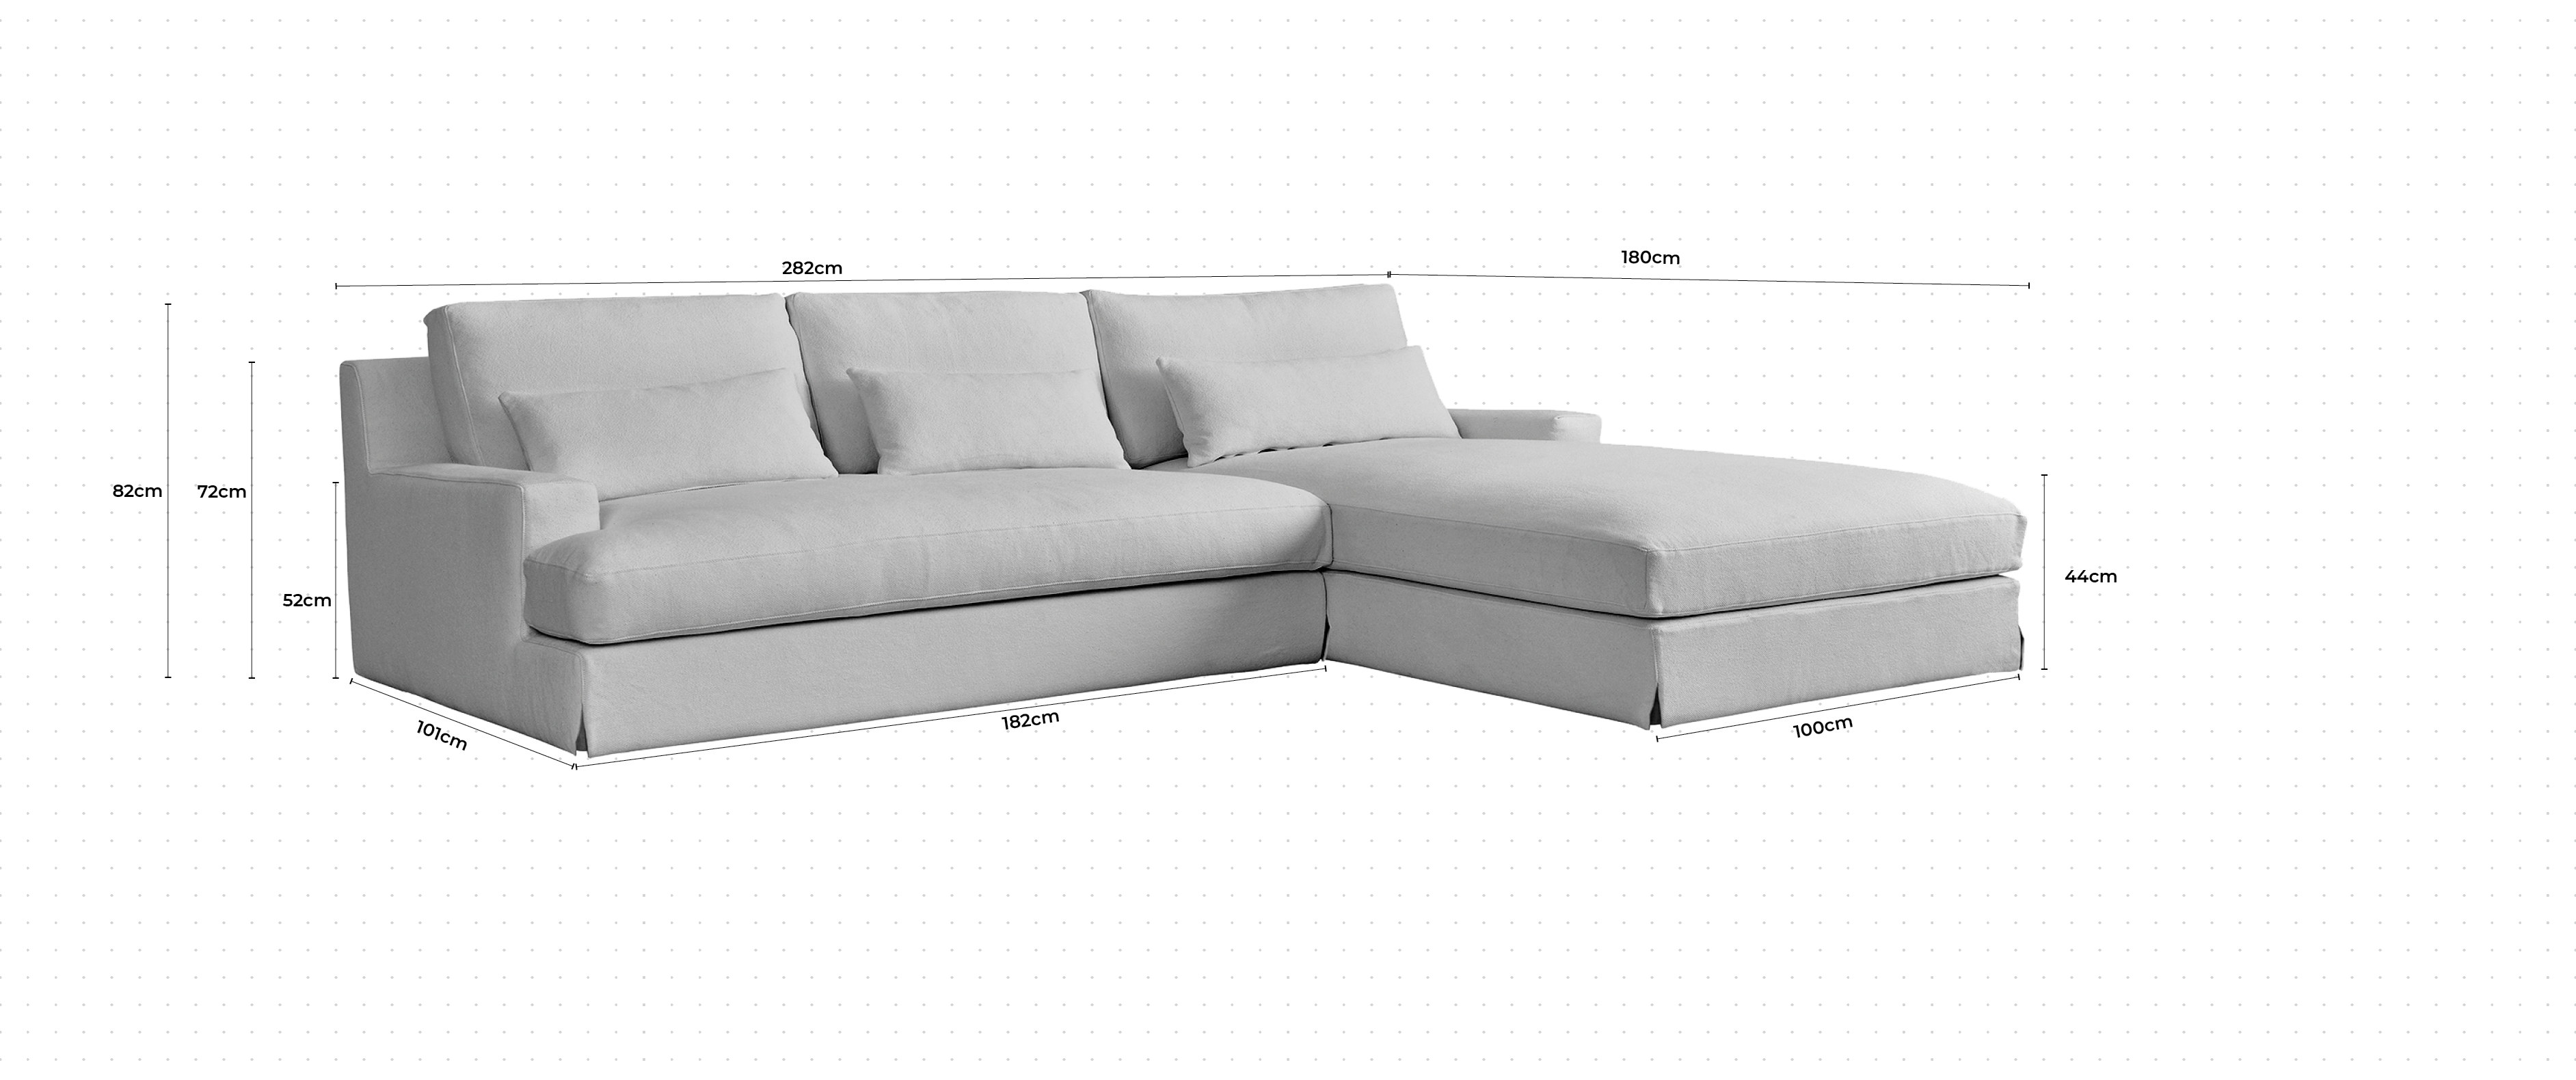 Panama With Skirt Large Chaise Sofa RHF dimensions